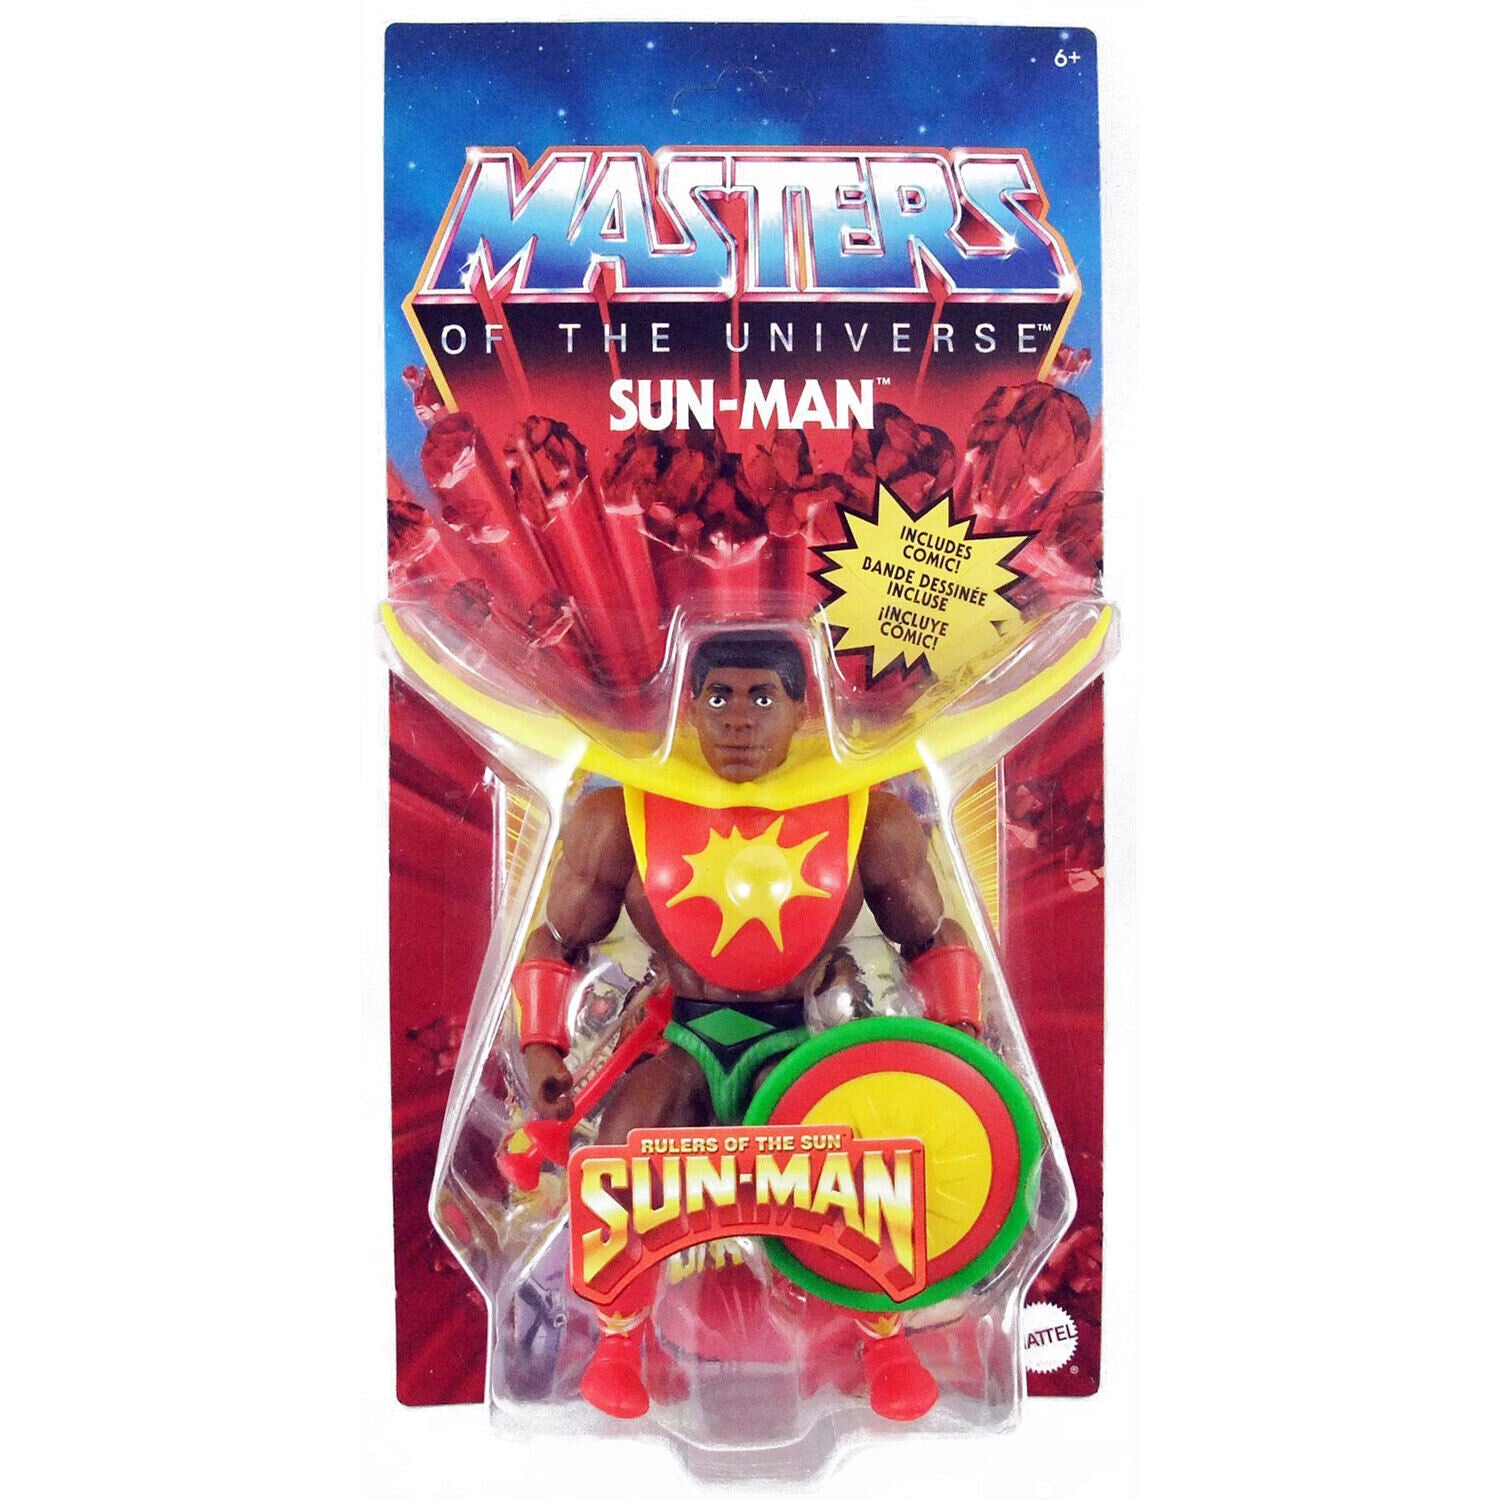 New Masters of the Universe Origins Sun-Man Action Figure - Sealed Box